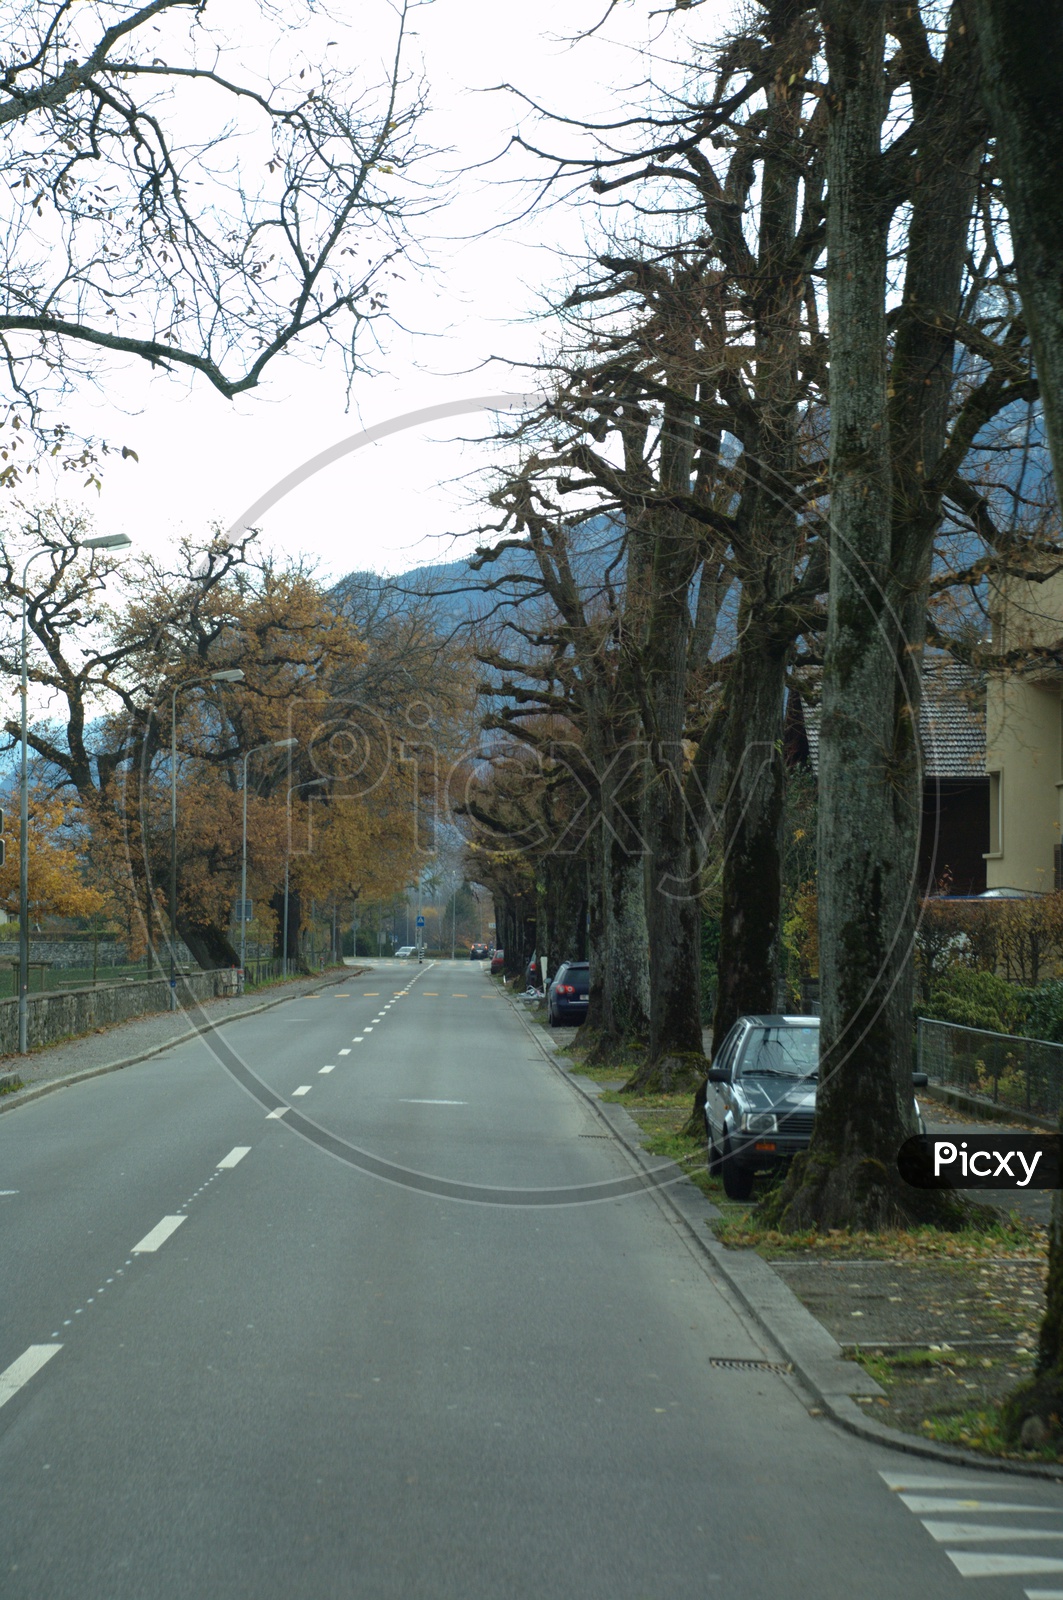 View of roadway alongside the trees